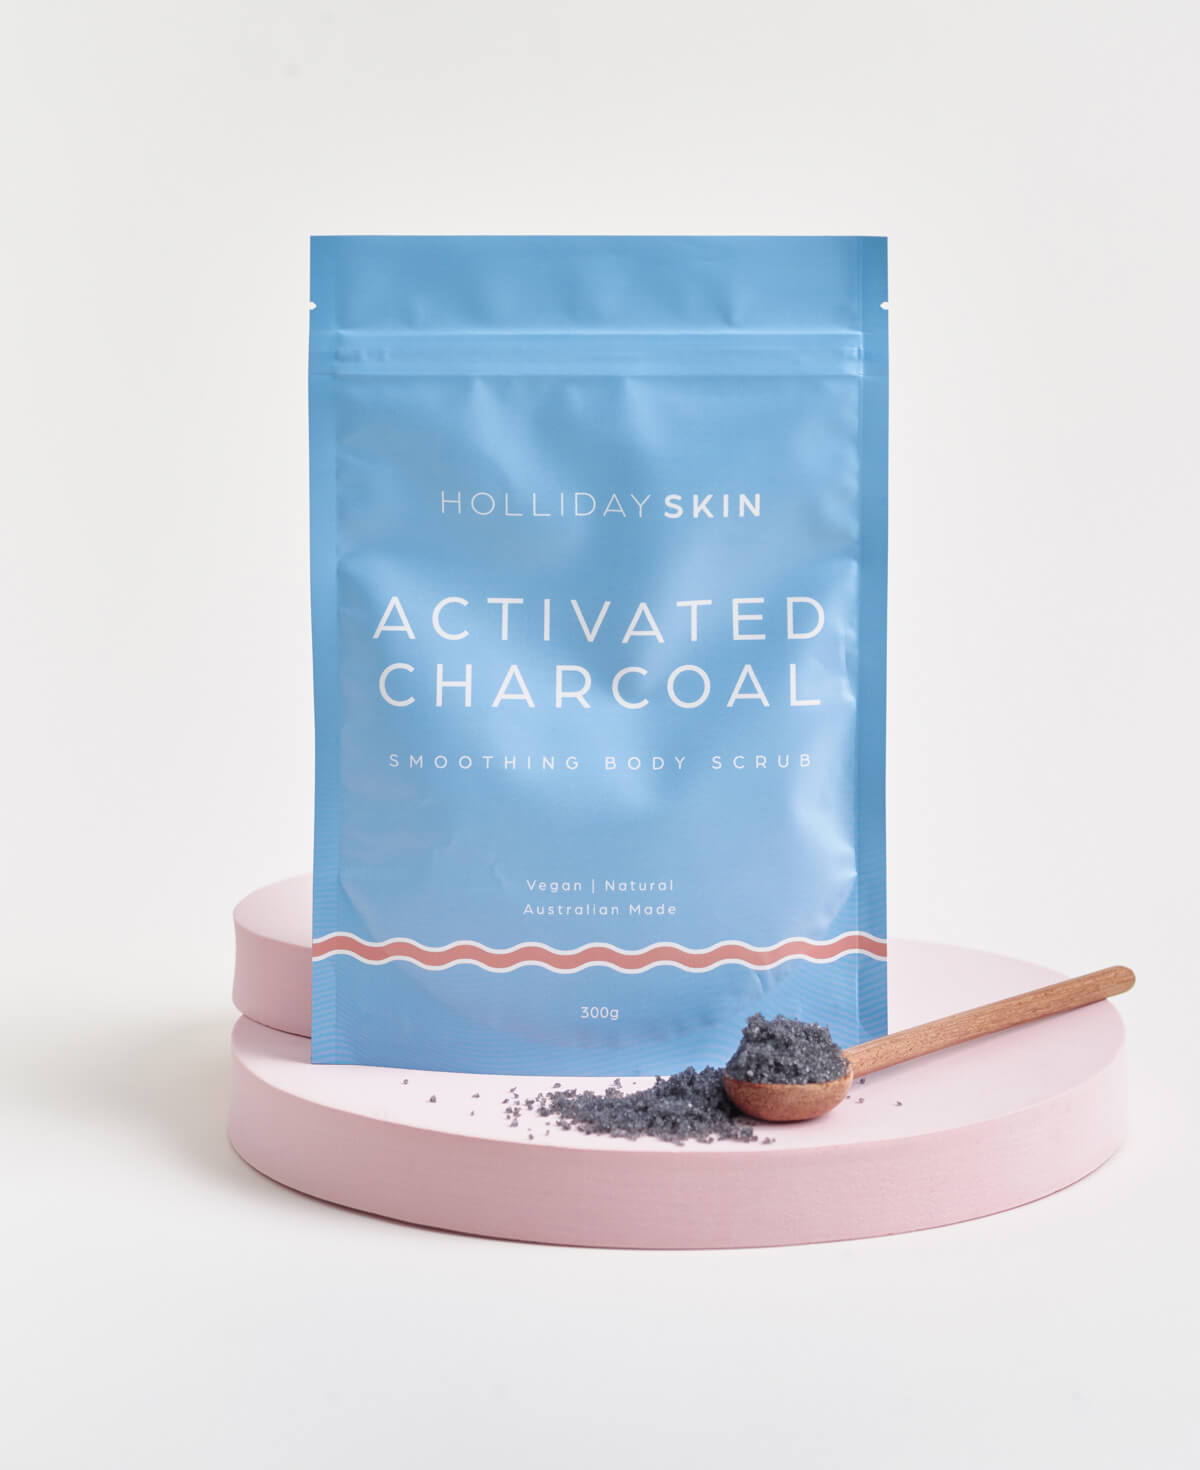 Activated Charcoal Smoothing Body Scrub